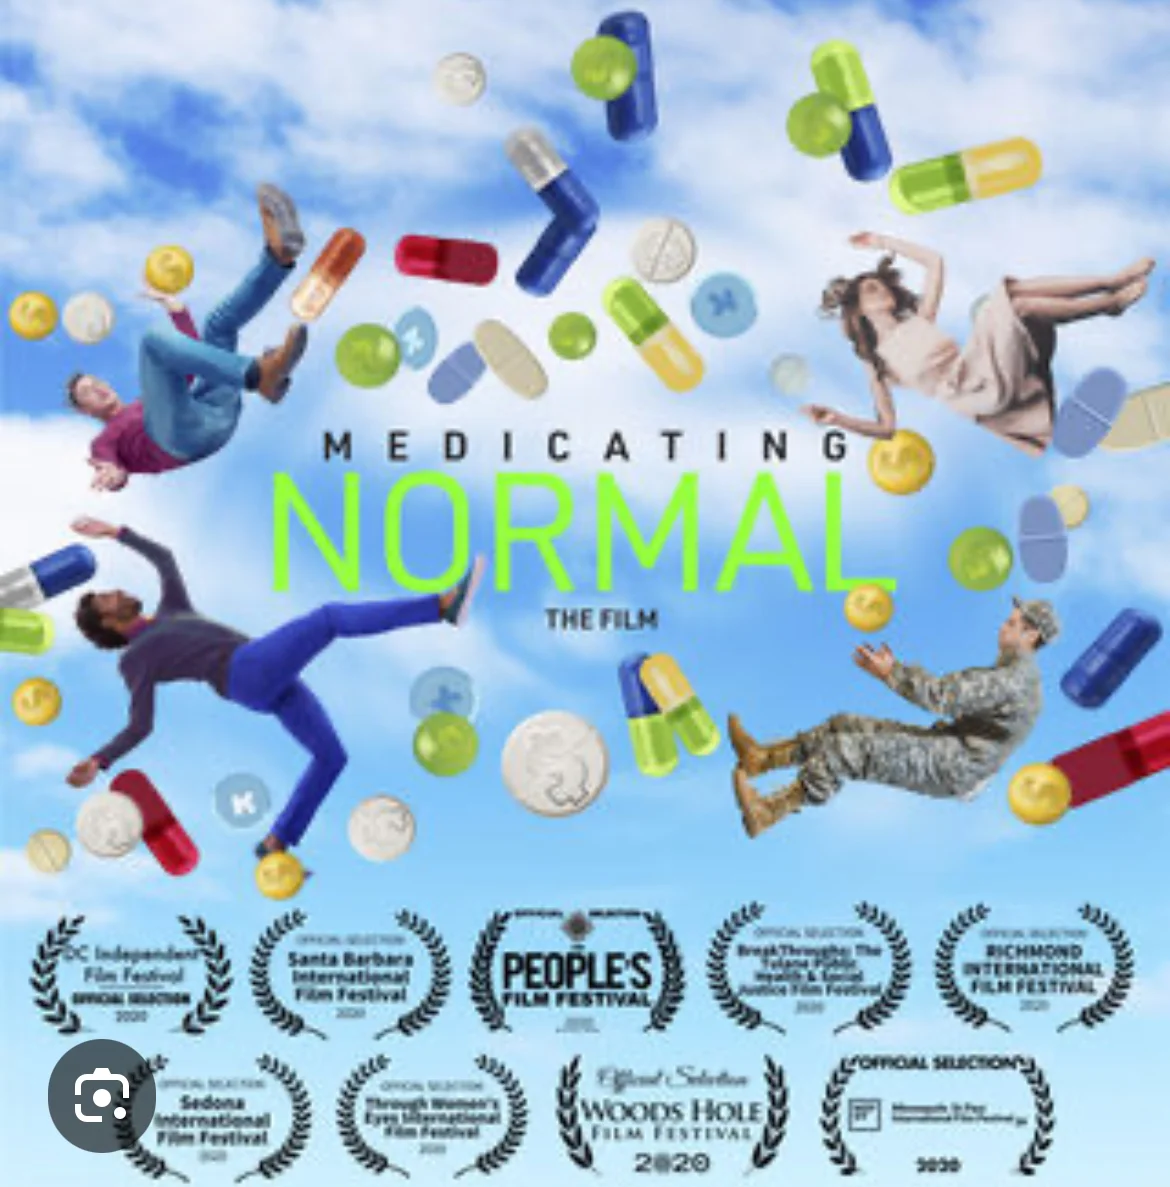 The Documentary, “Medicating Normal “